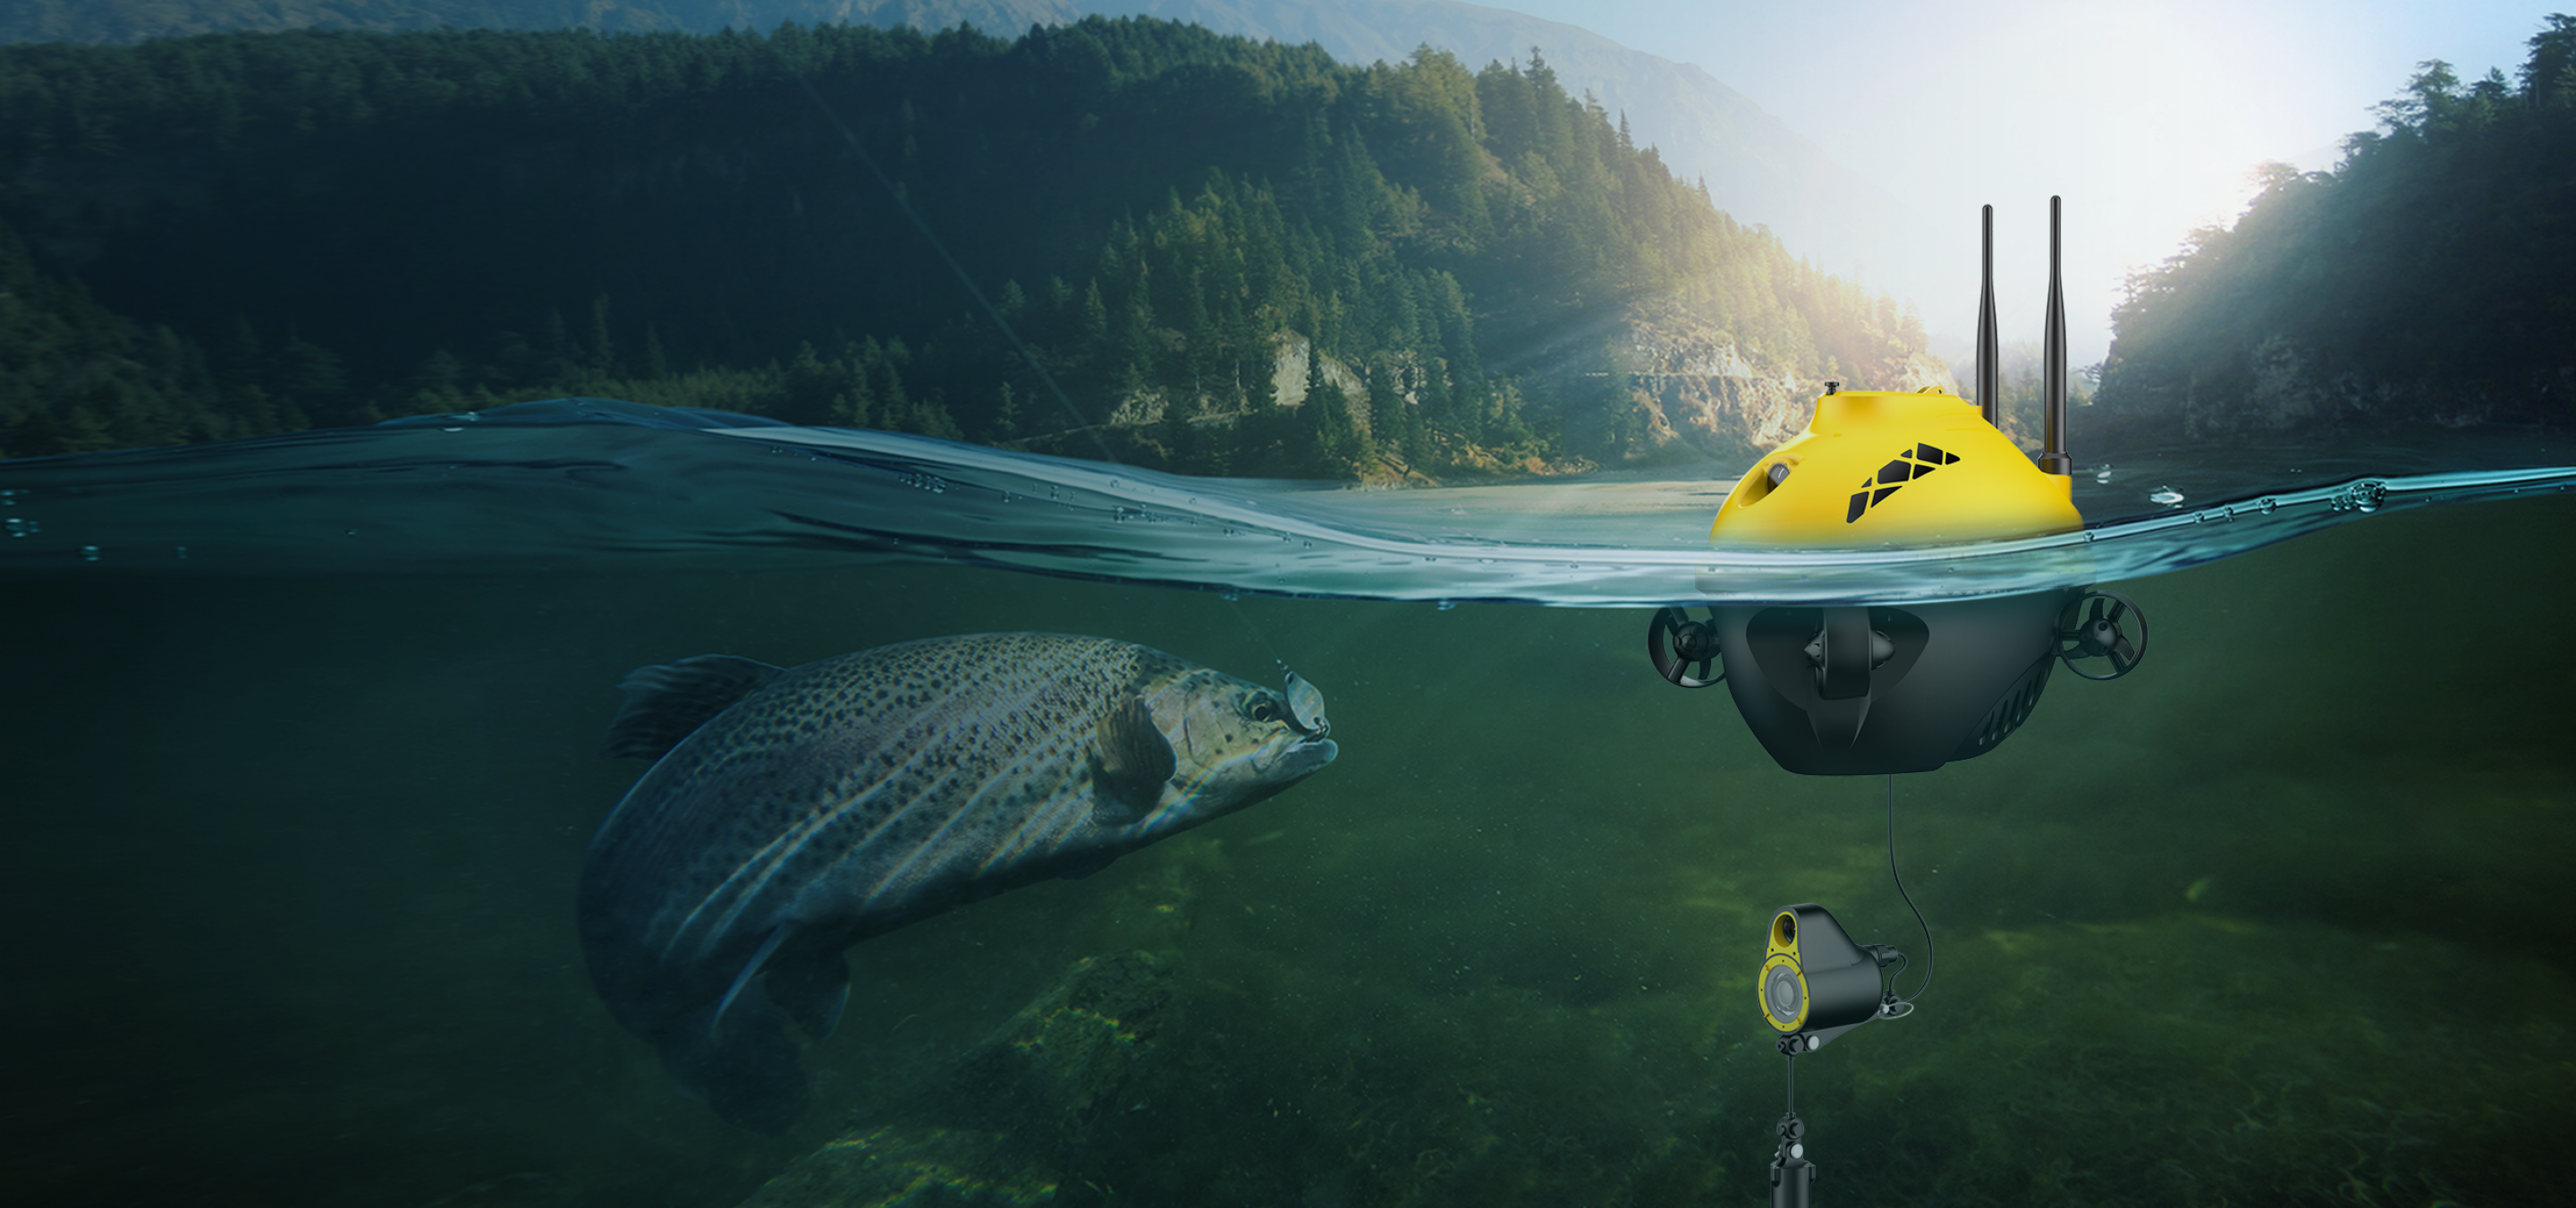 Drone Fish Finder Underwater Video Camera with Bait Boat and Sonar  Underwater Fishing Drone